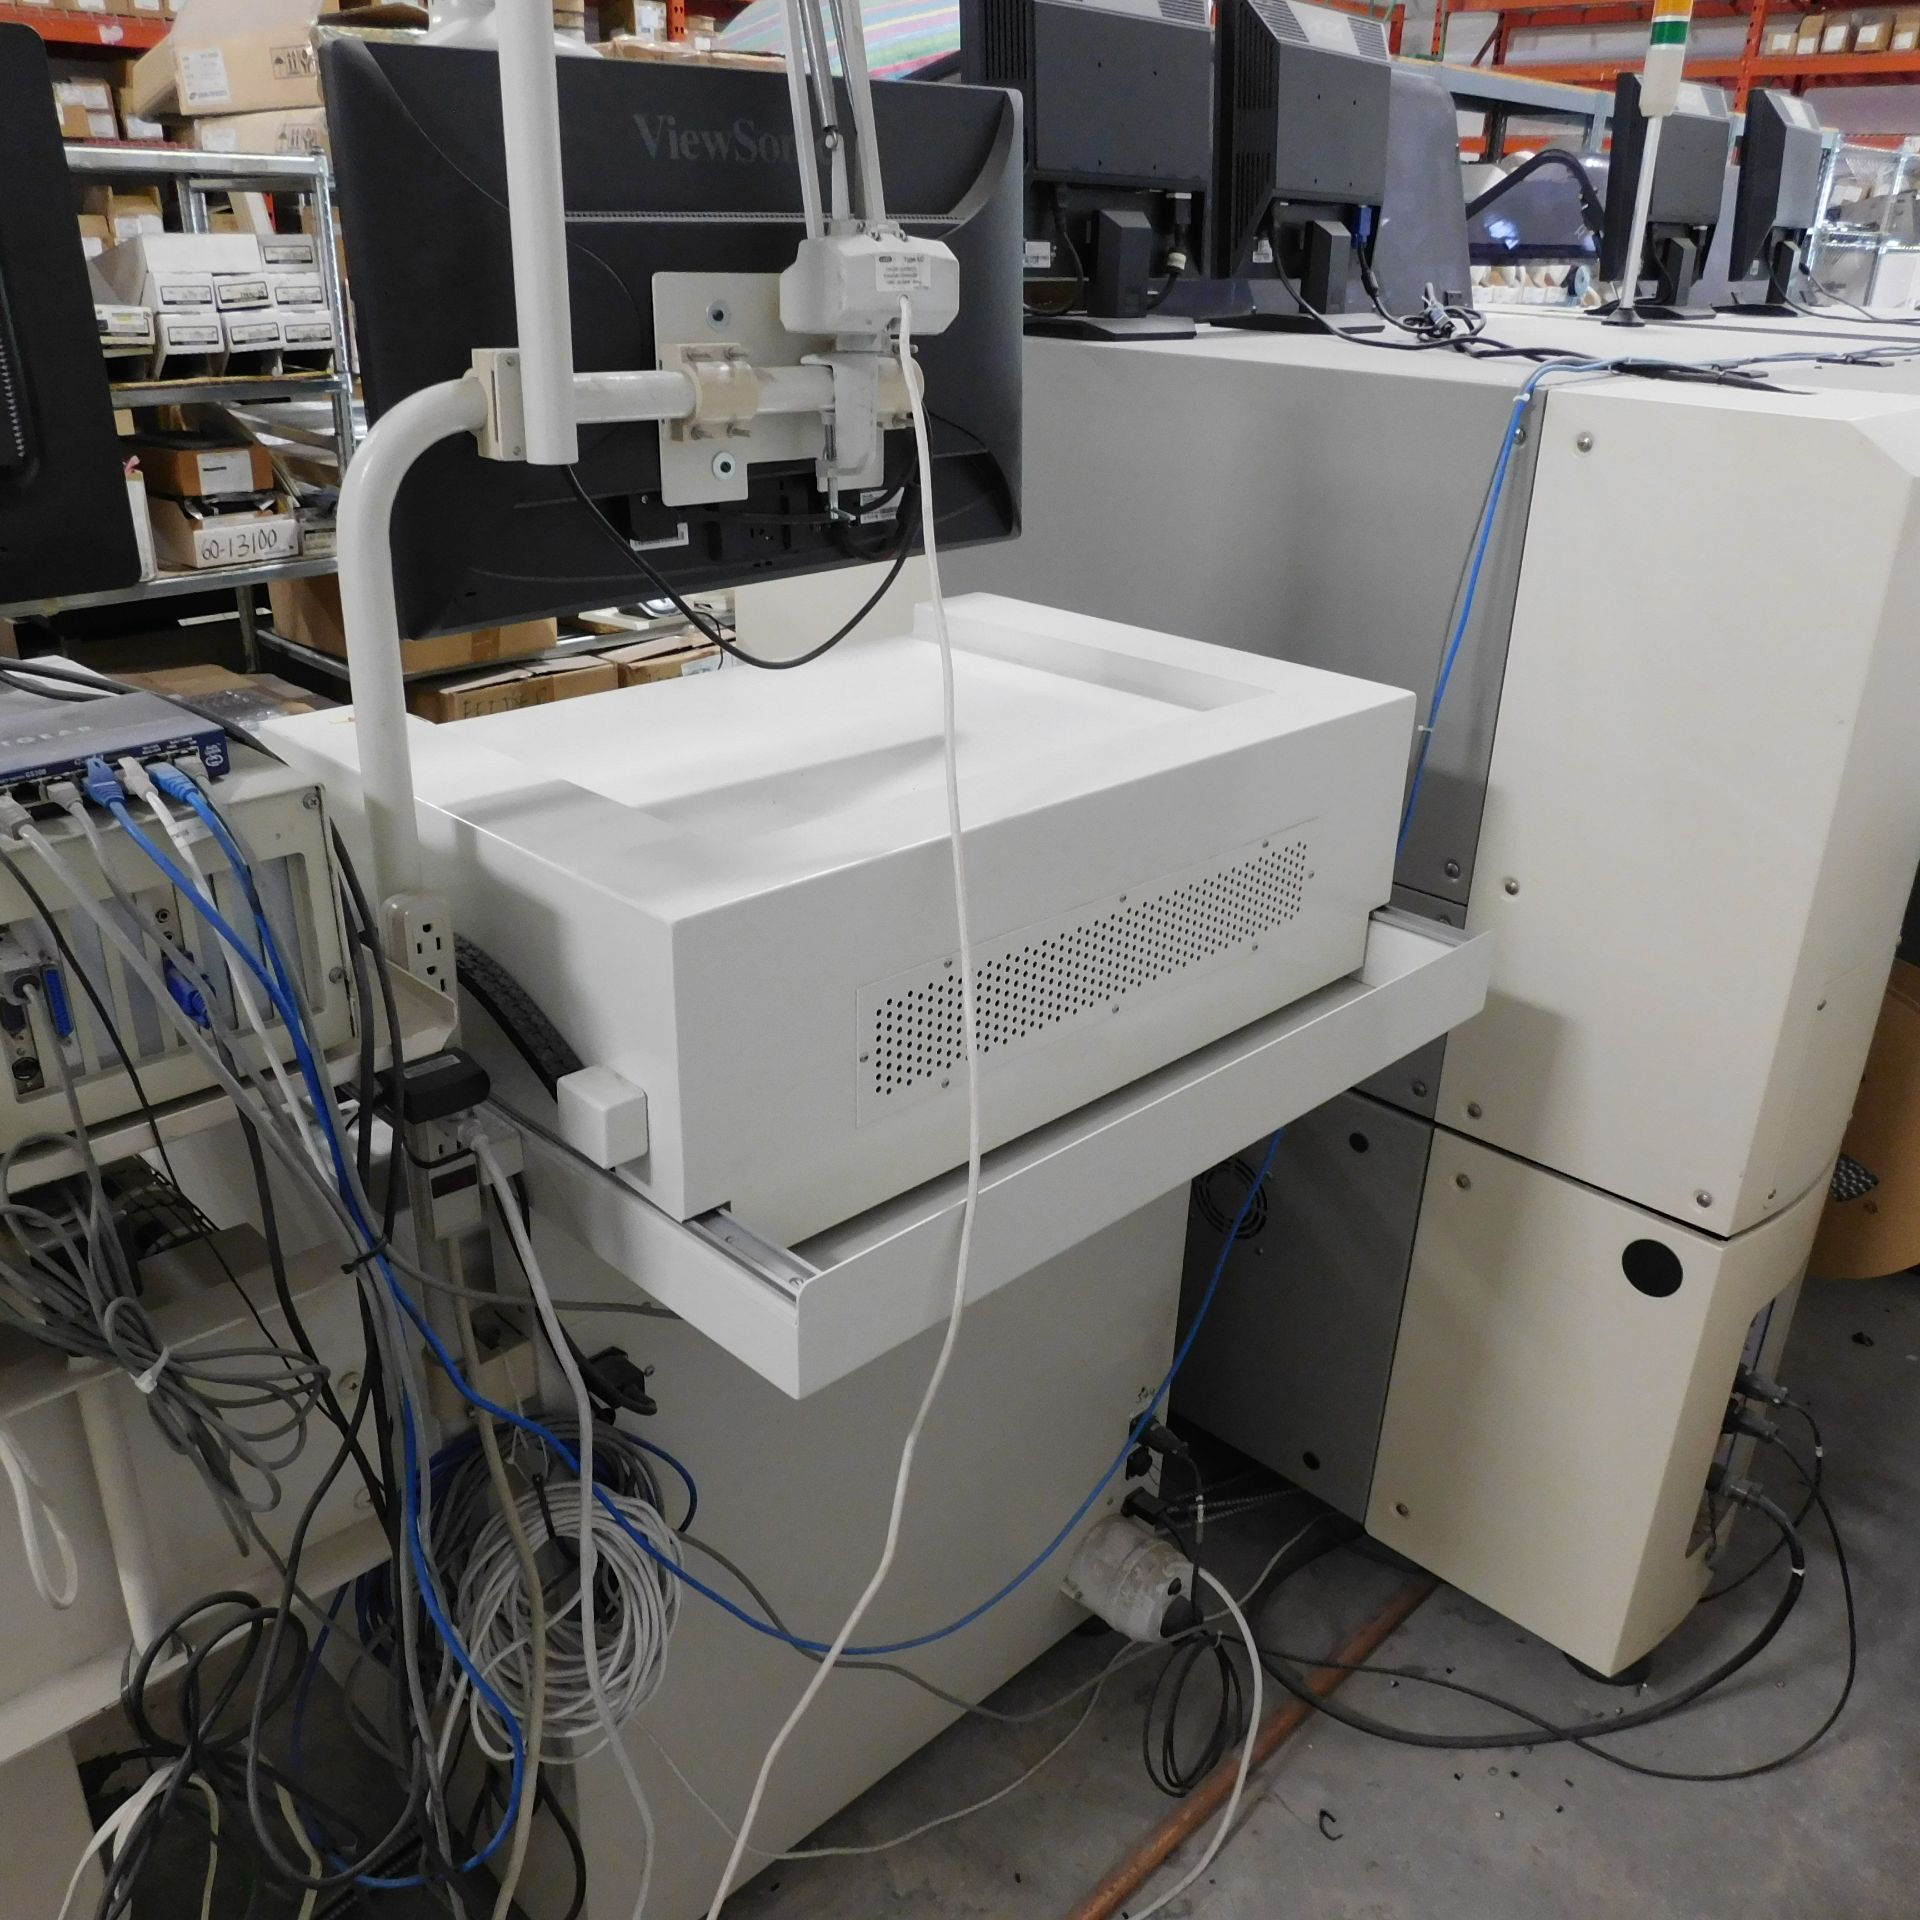 2014 AOI SYSTEMS SCANSPECTION SYSTEM SS15000IL, MODIFIED EPSON GT20000 A3 SCANNER (600 DPI OPTICAL) - Image 5 of 5